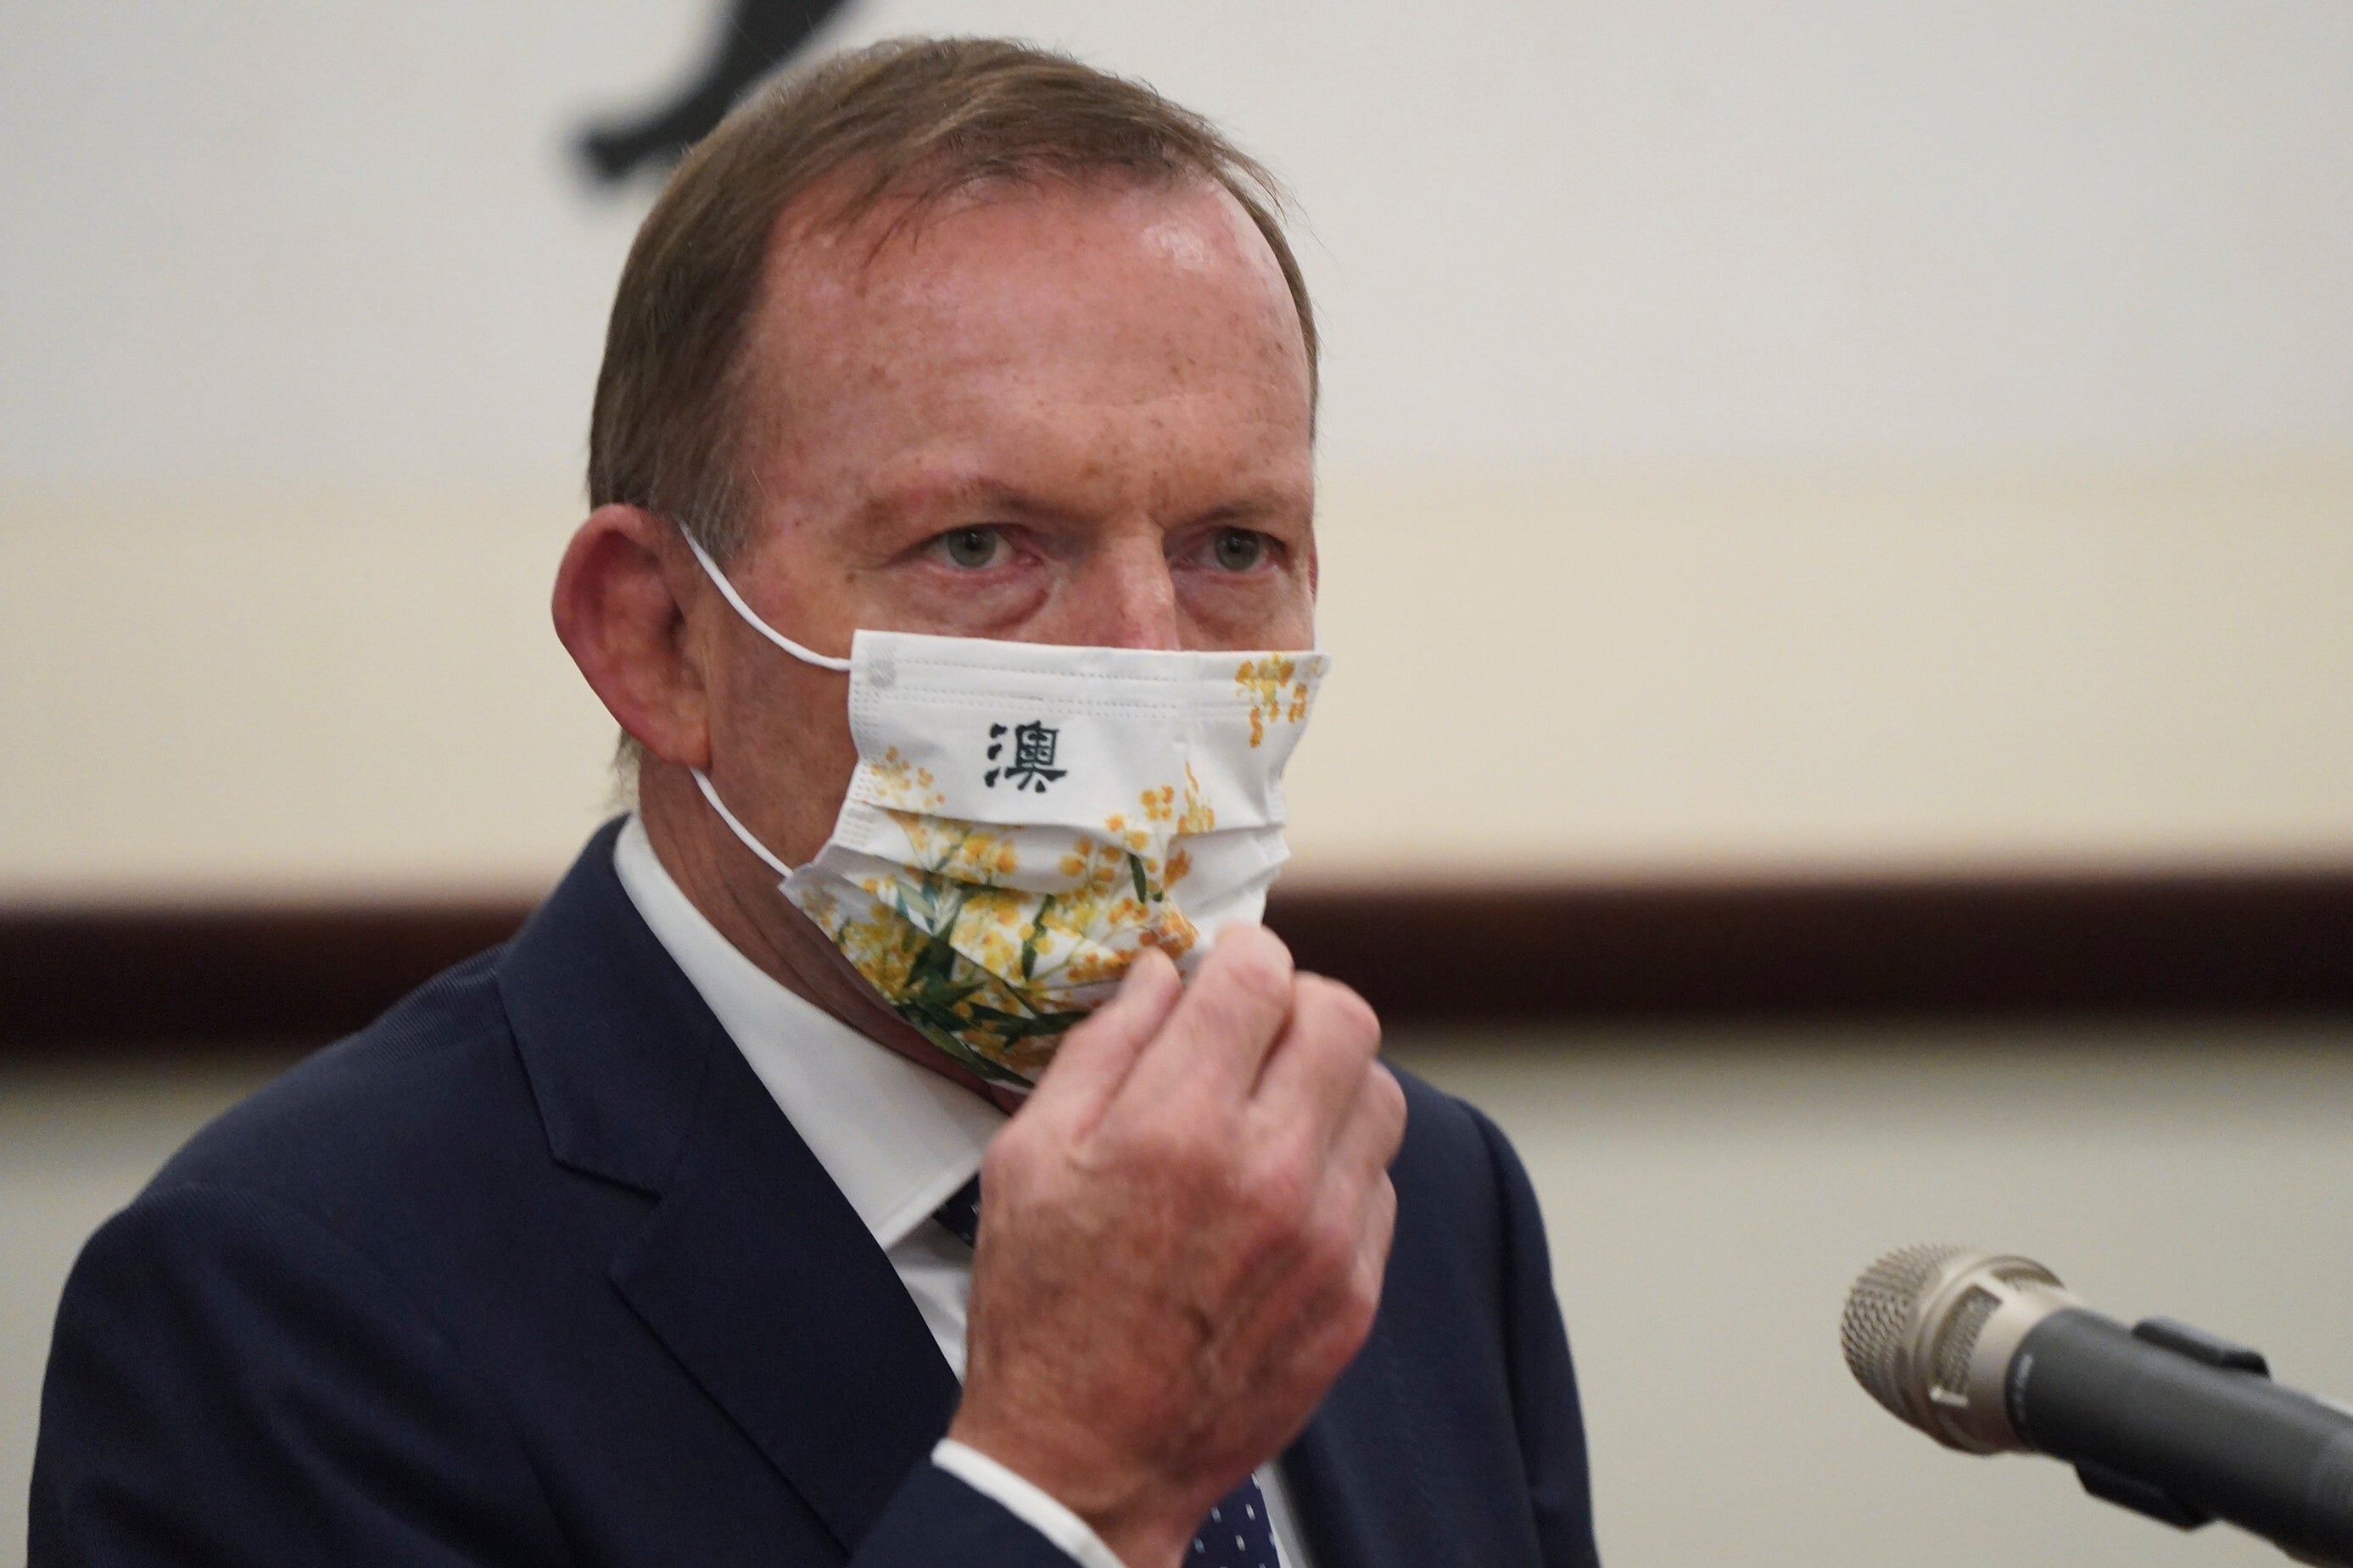 File: Former Australian prime minister Tony Abbott wears a mask with the Chinese character for ‘Australia’ during a meeting with Taiwanese President Tsai Ing-wen